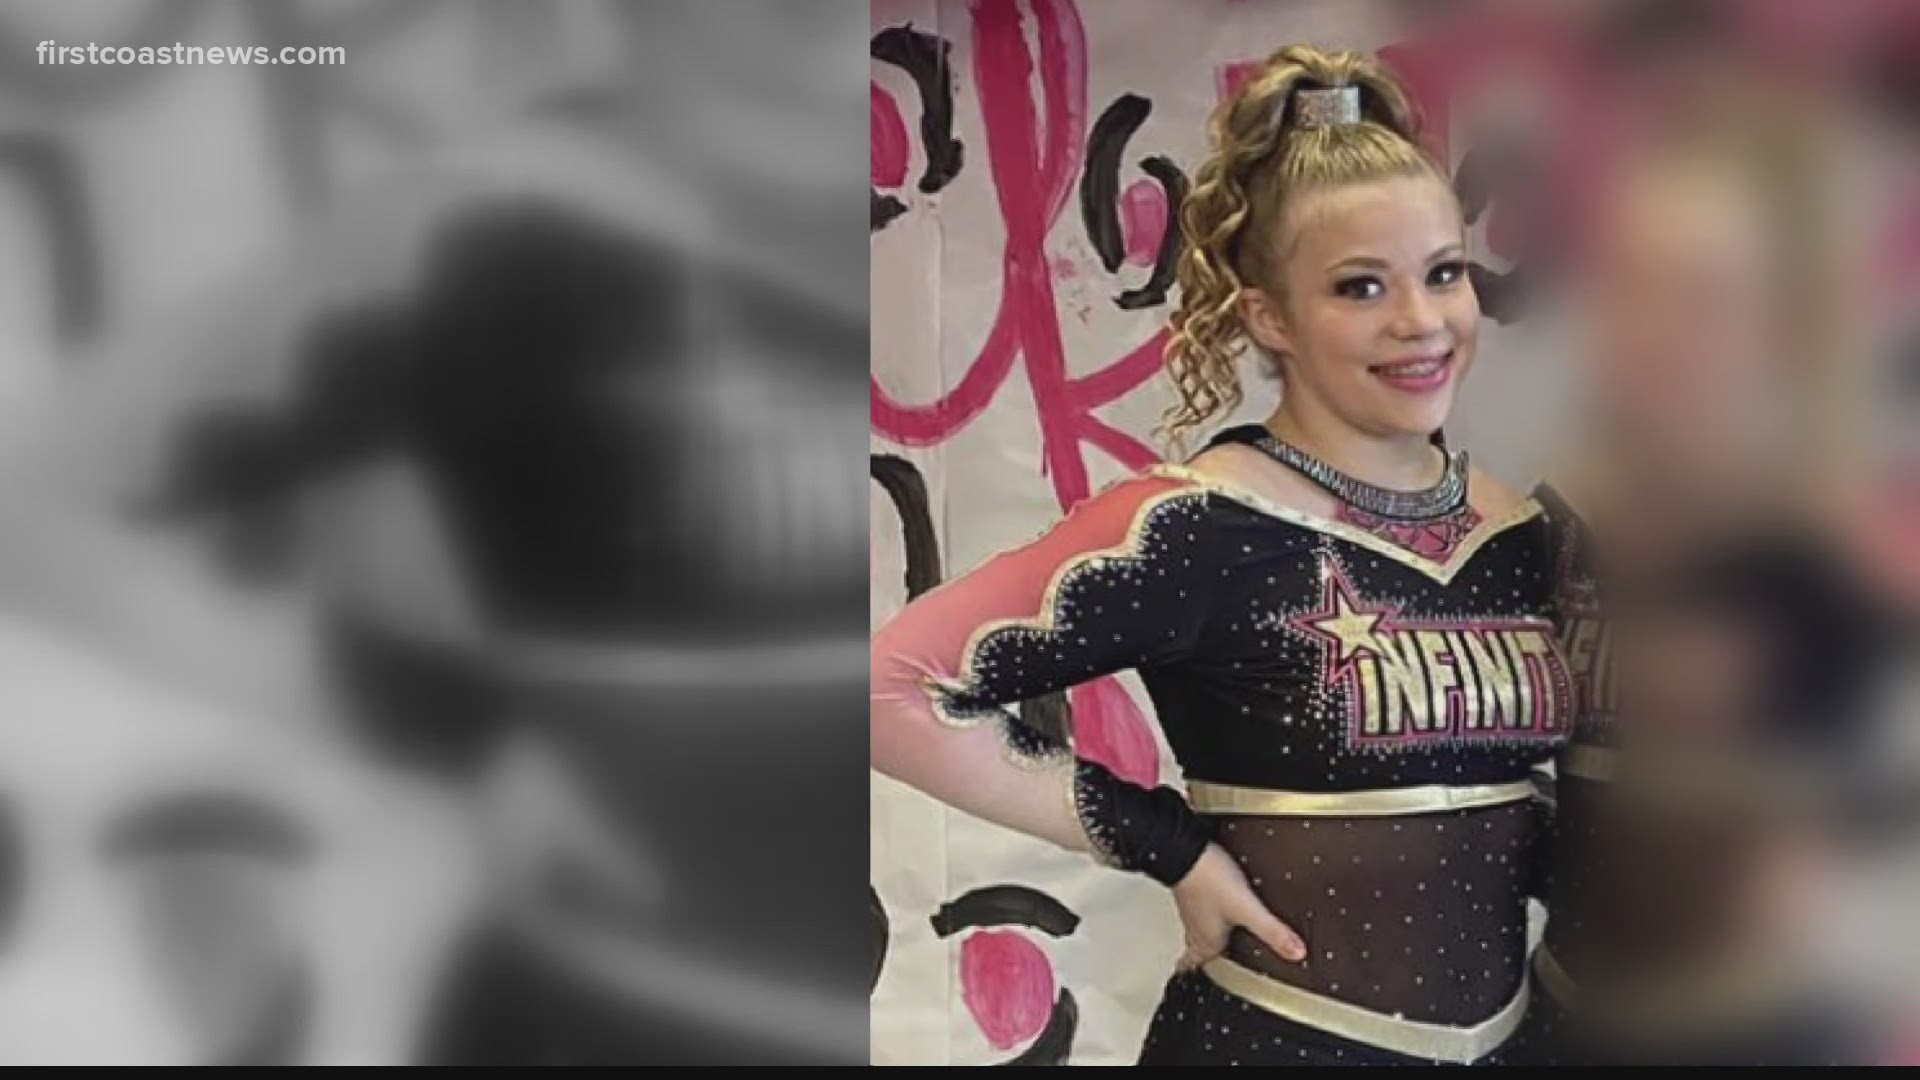 The State Attorney's Office announced Thursday the 14-year-old Fucci will be charged as an adult for the murder of Tristyn Bailey.